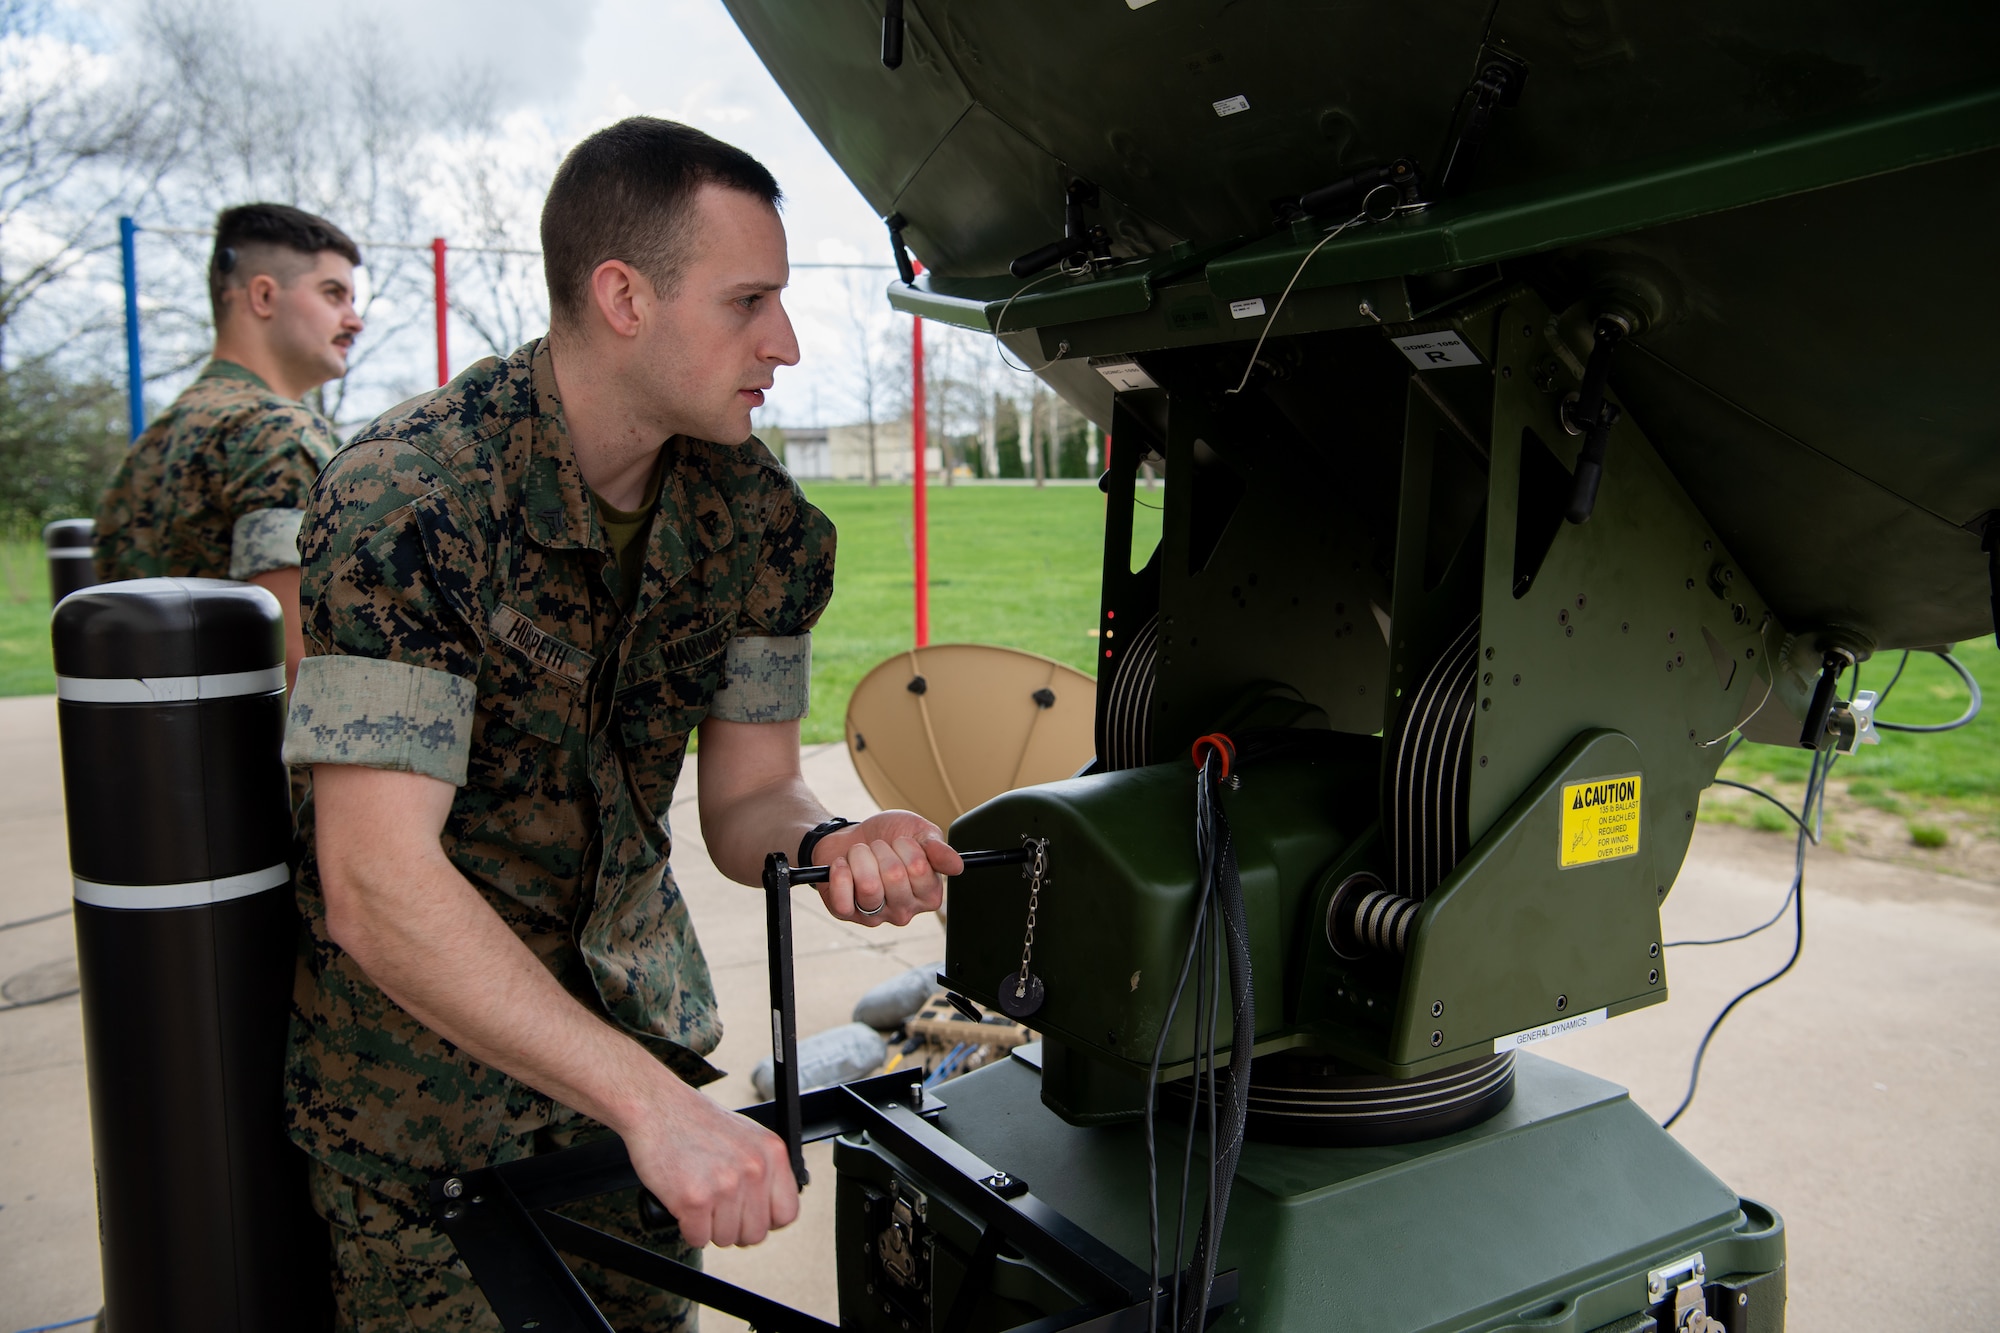 A man in a United States Marine Corps uniform cranks a lever on a satellite to adjust its position. In the background, a man with a mustache with similar uniform. Both men are outside.